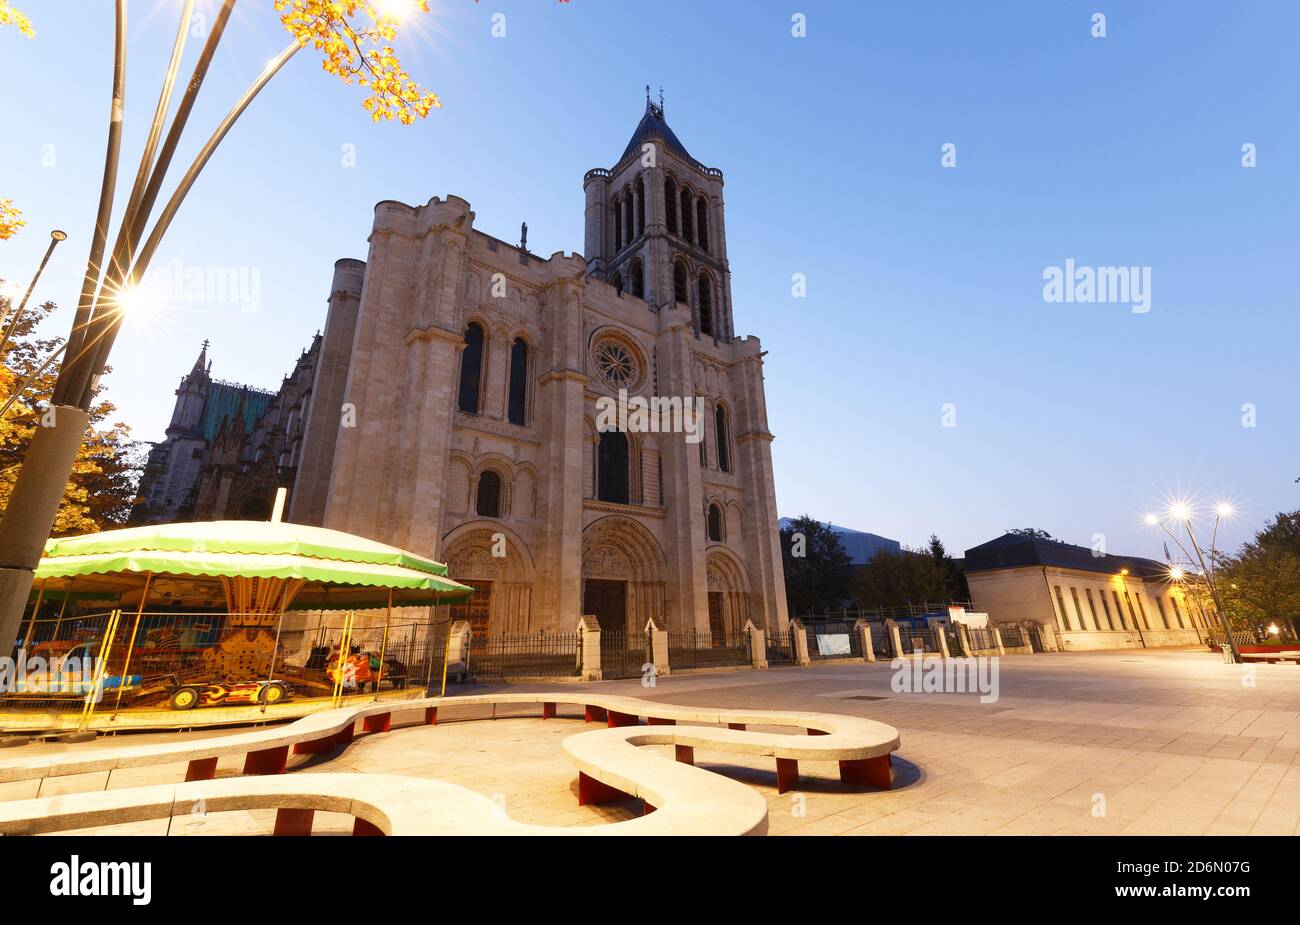 The Basilica of Saint-Denis is the symbol for a 1000 years of the French royal family ties with Christianity. Paris. France. Stock Photo